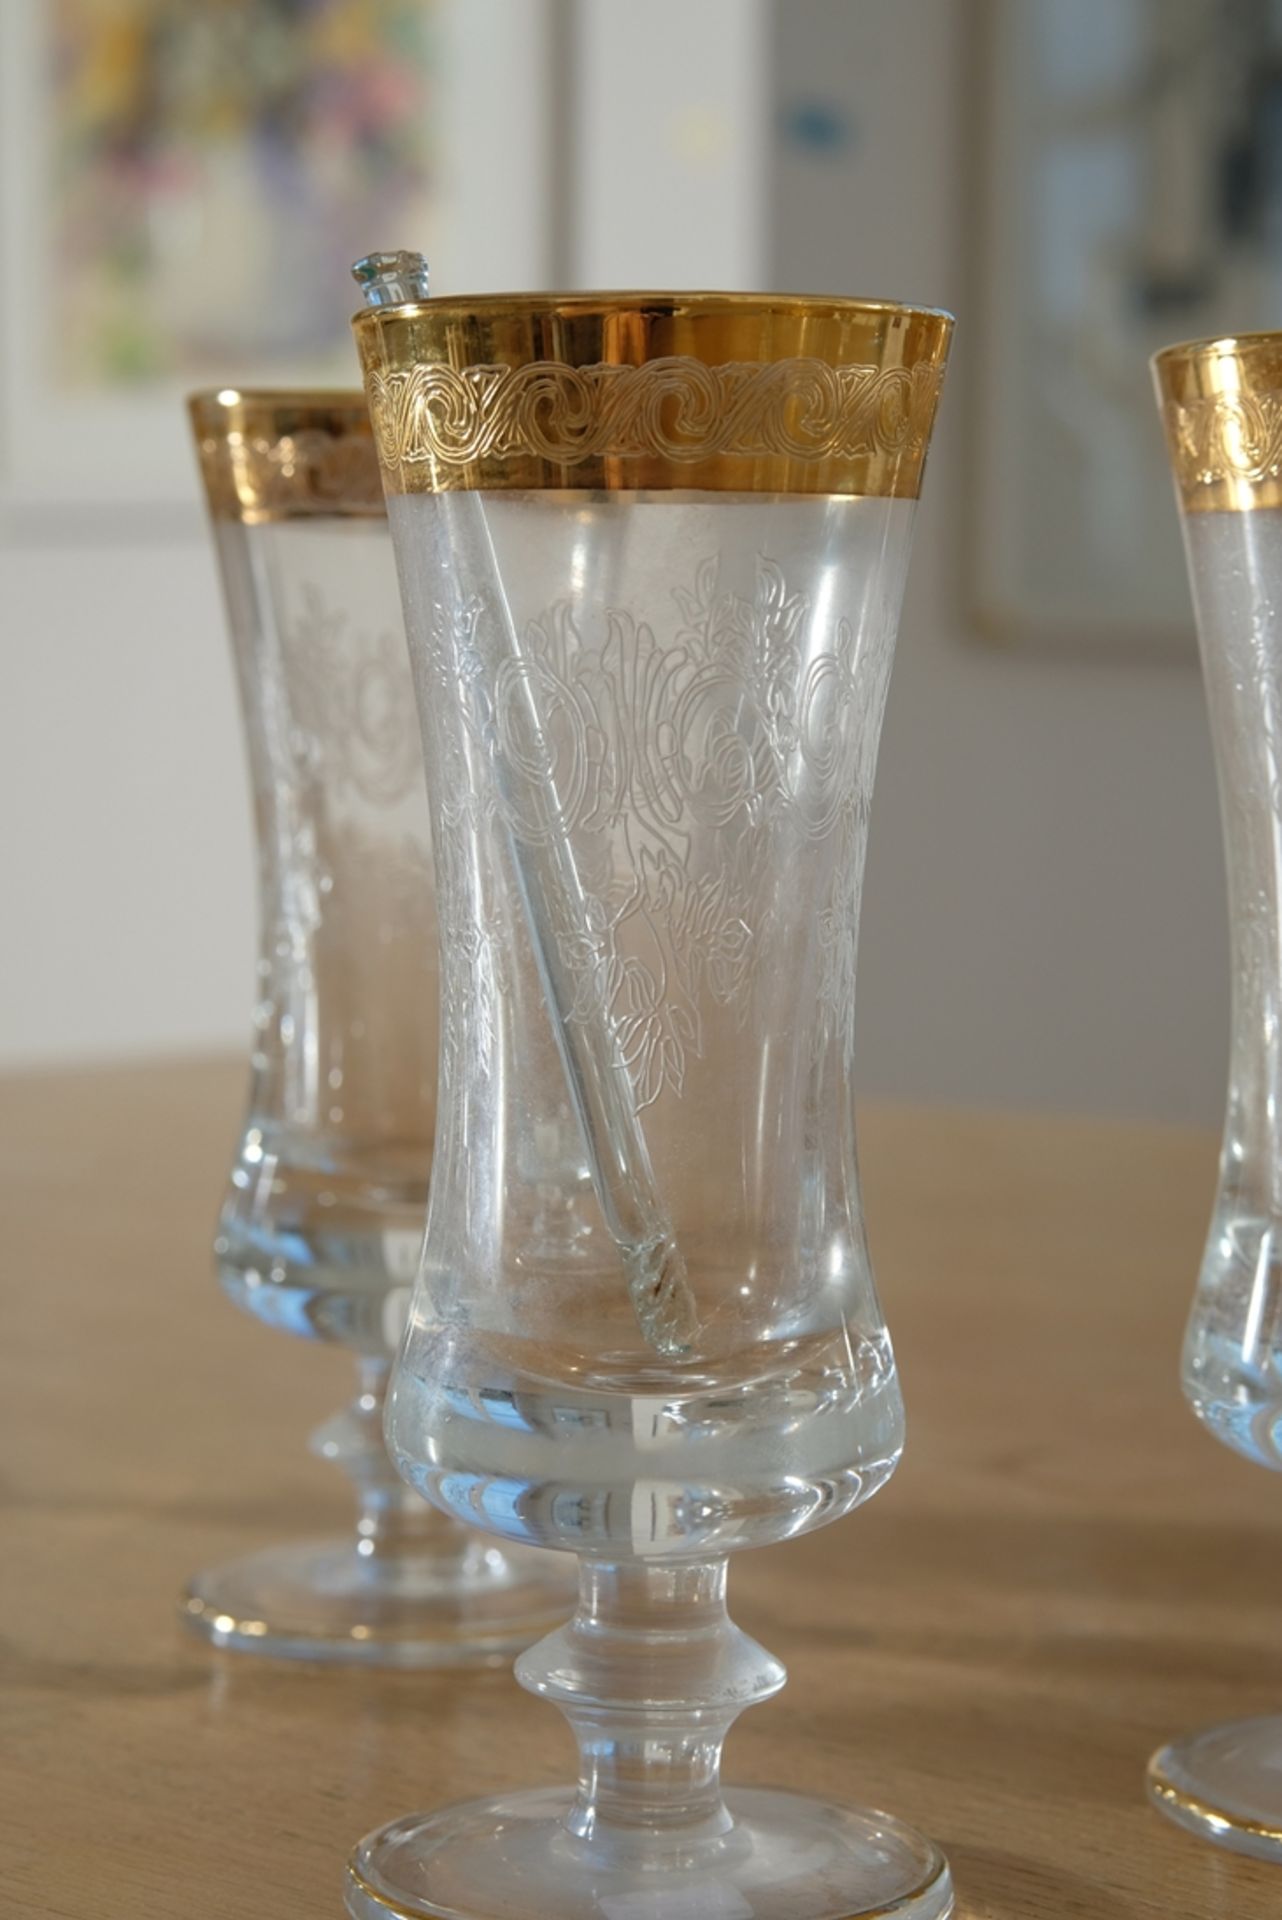 Murano Medici gold rim, six champagne flutes, crystal glass engraved with plant motifs. - Image 3 of 3